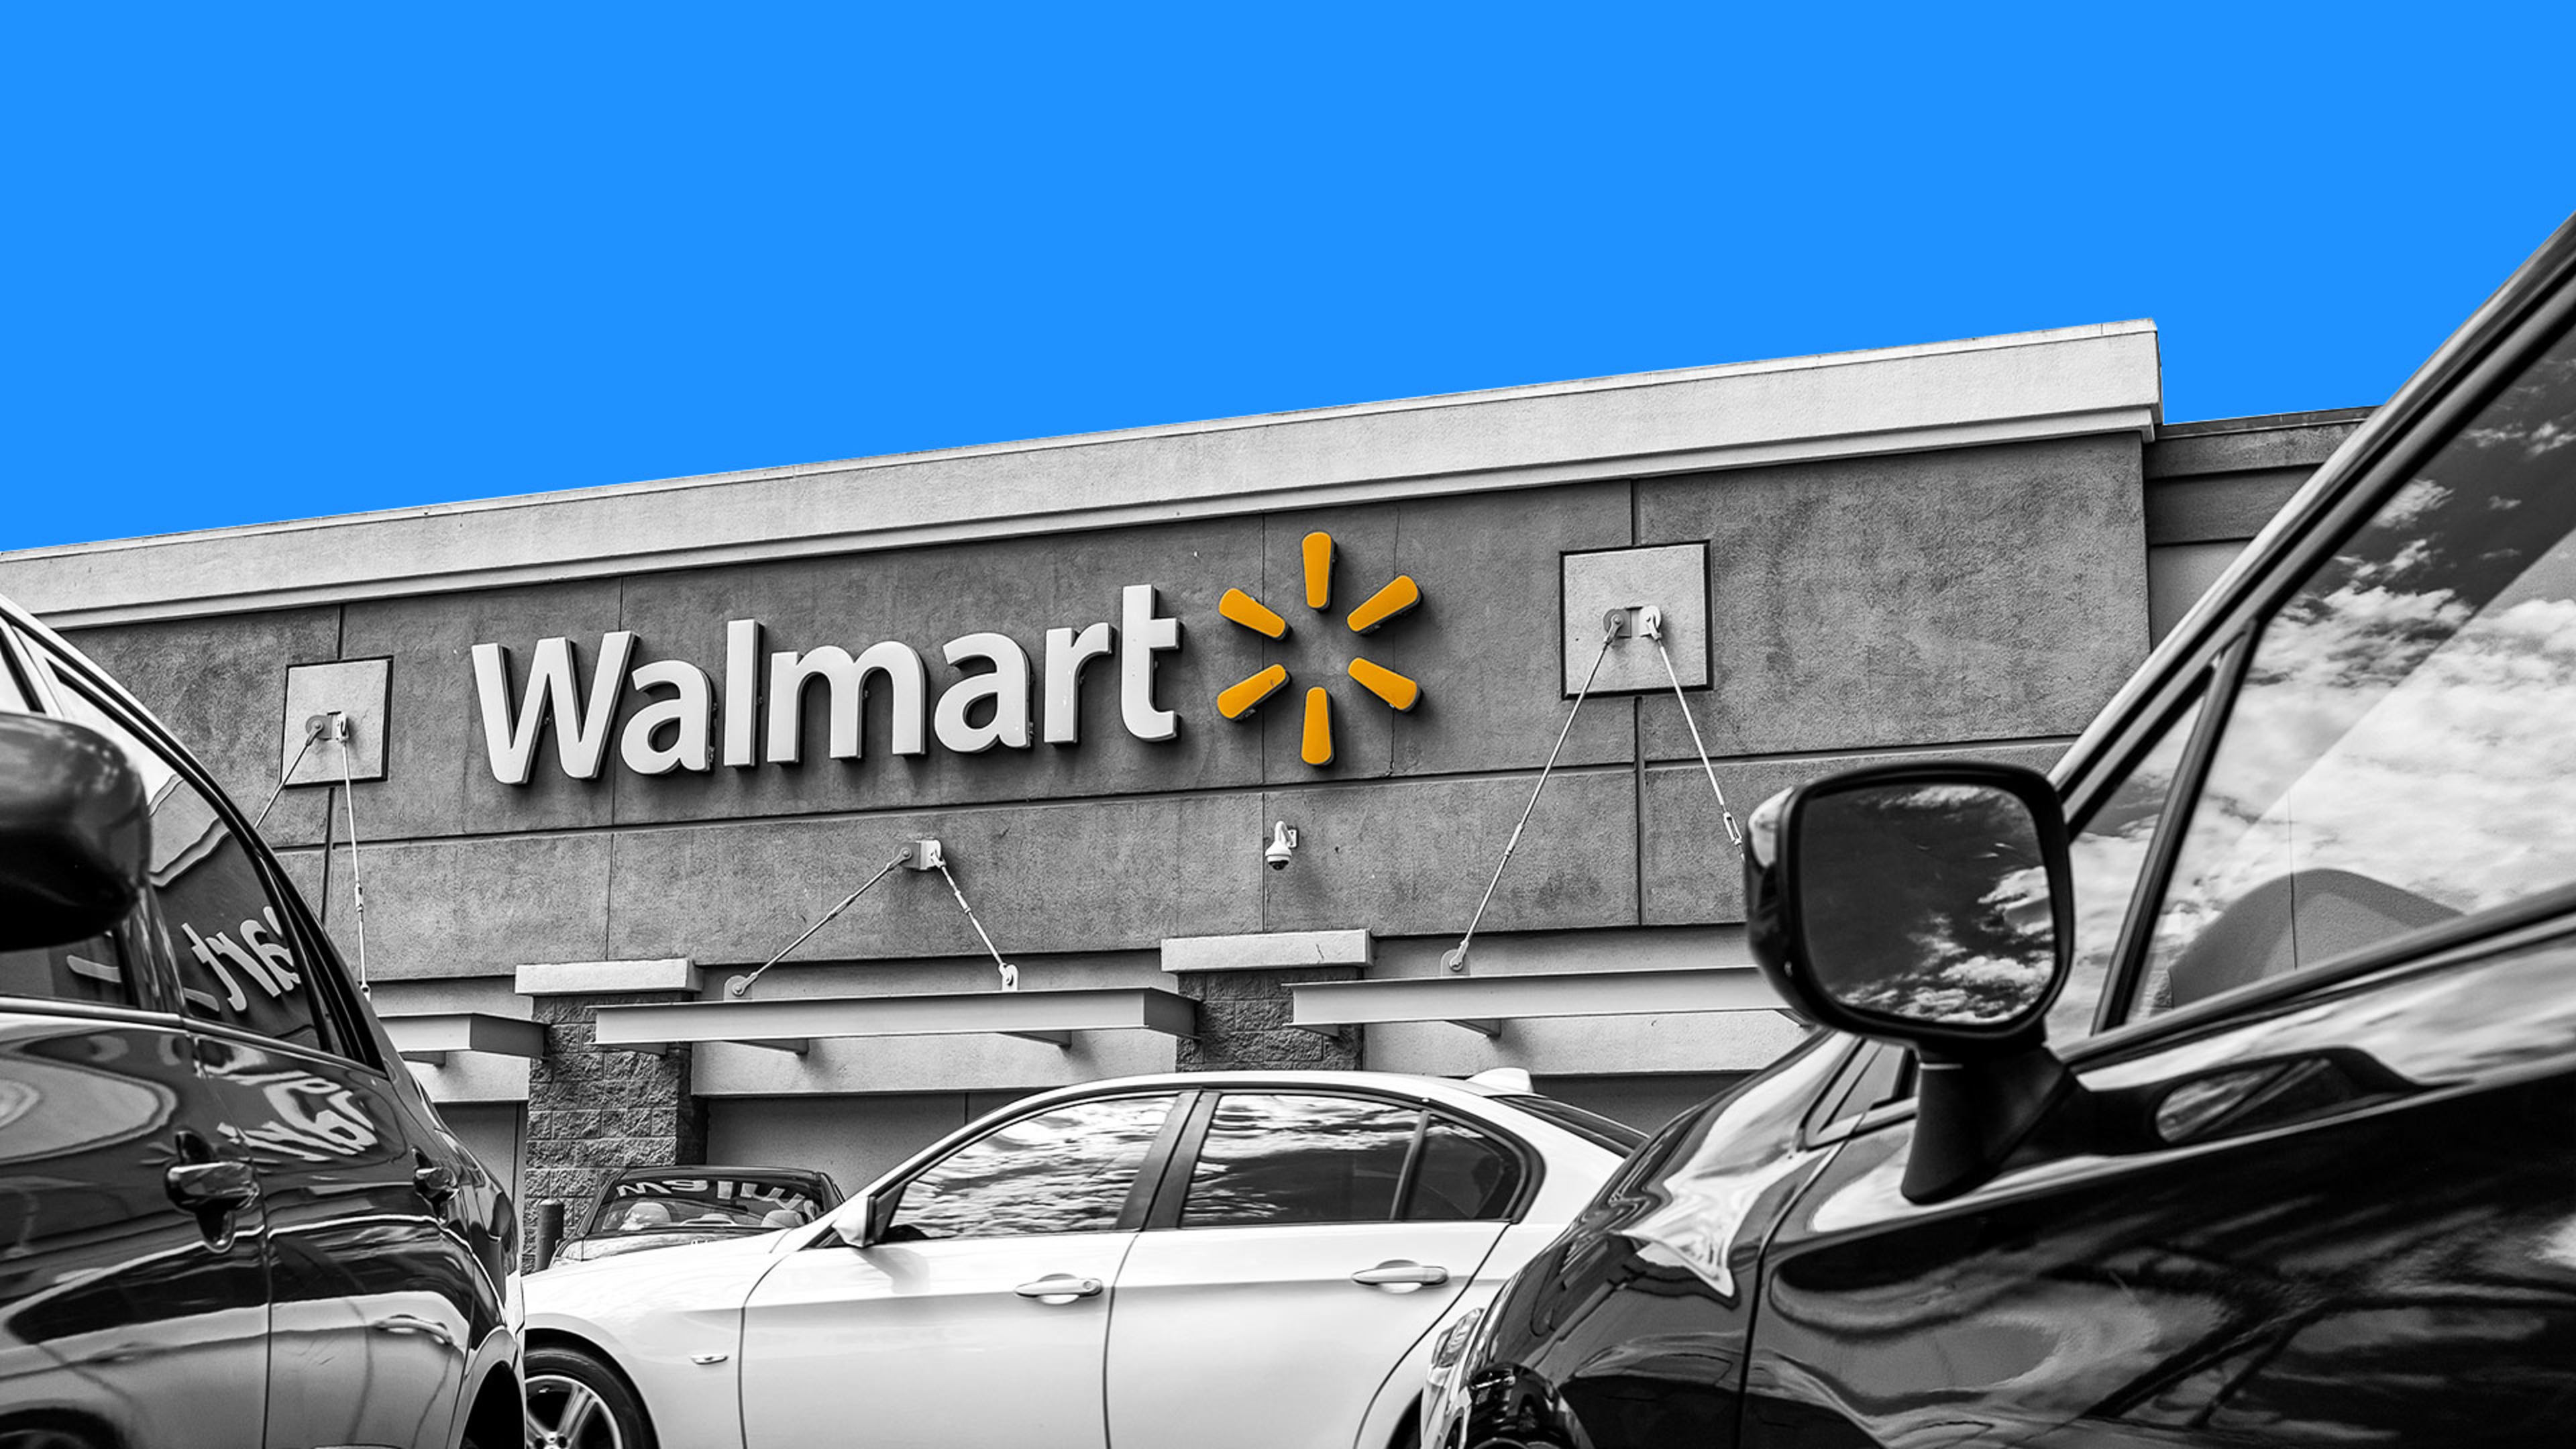 Walmart stock is splitting: Here’s what that means for WMT investors and employees